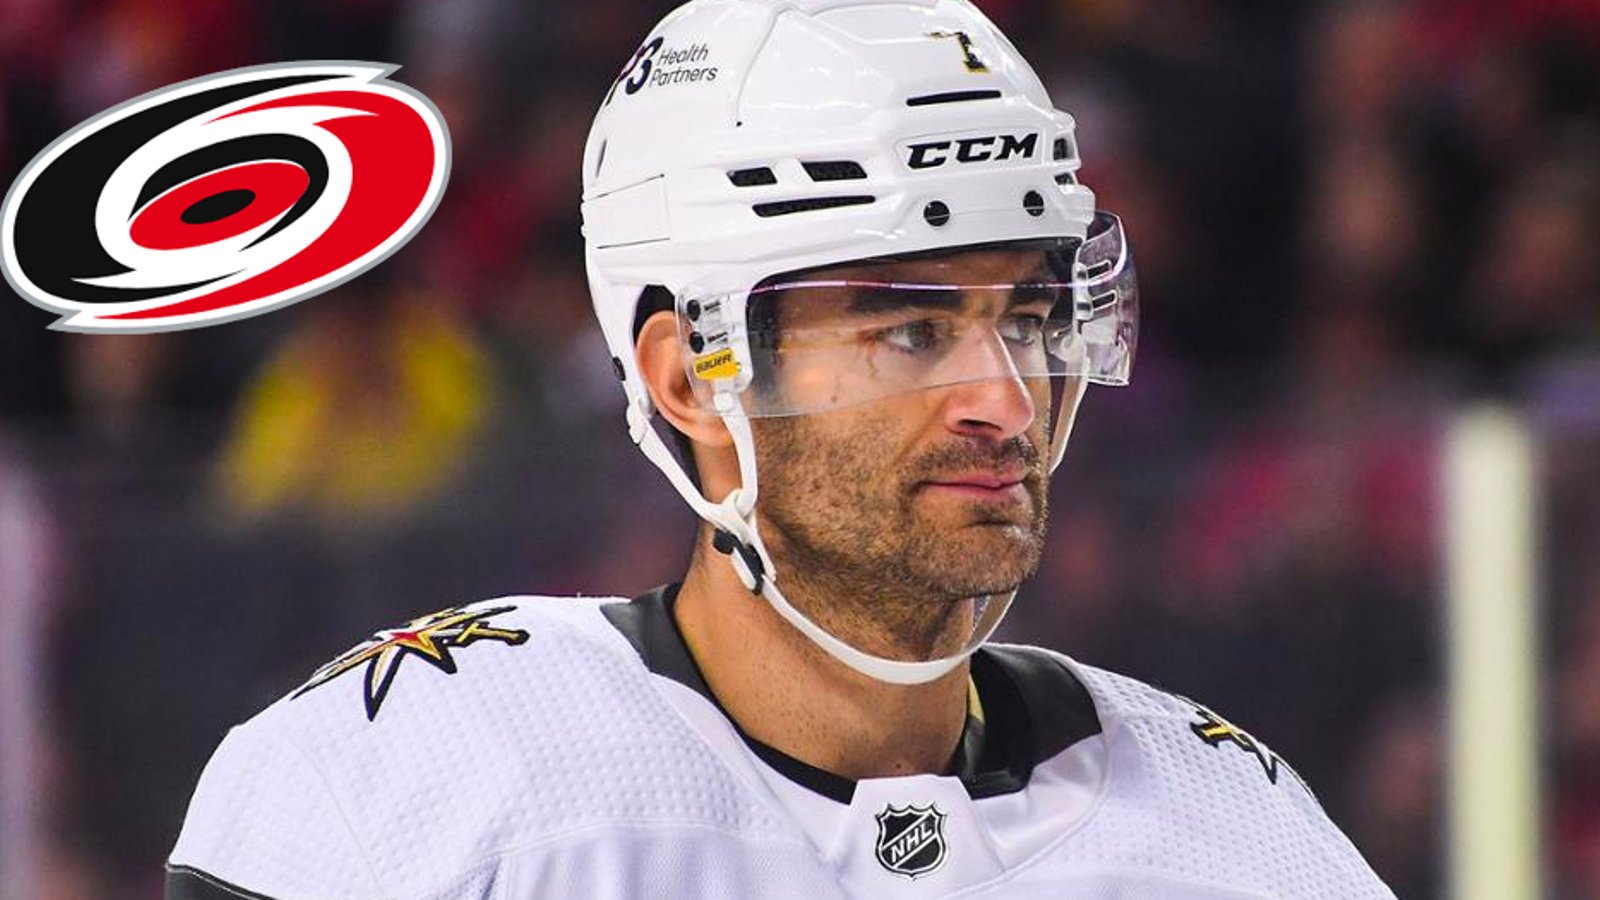 Pacioretty out of action for 6 months